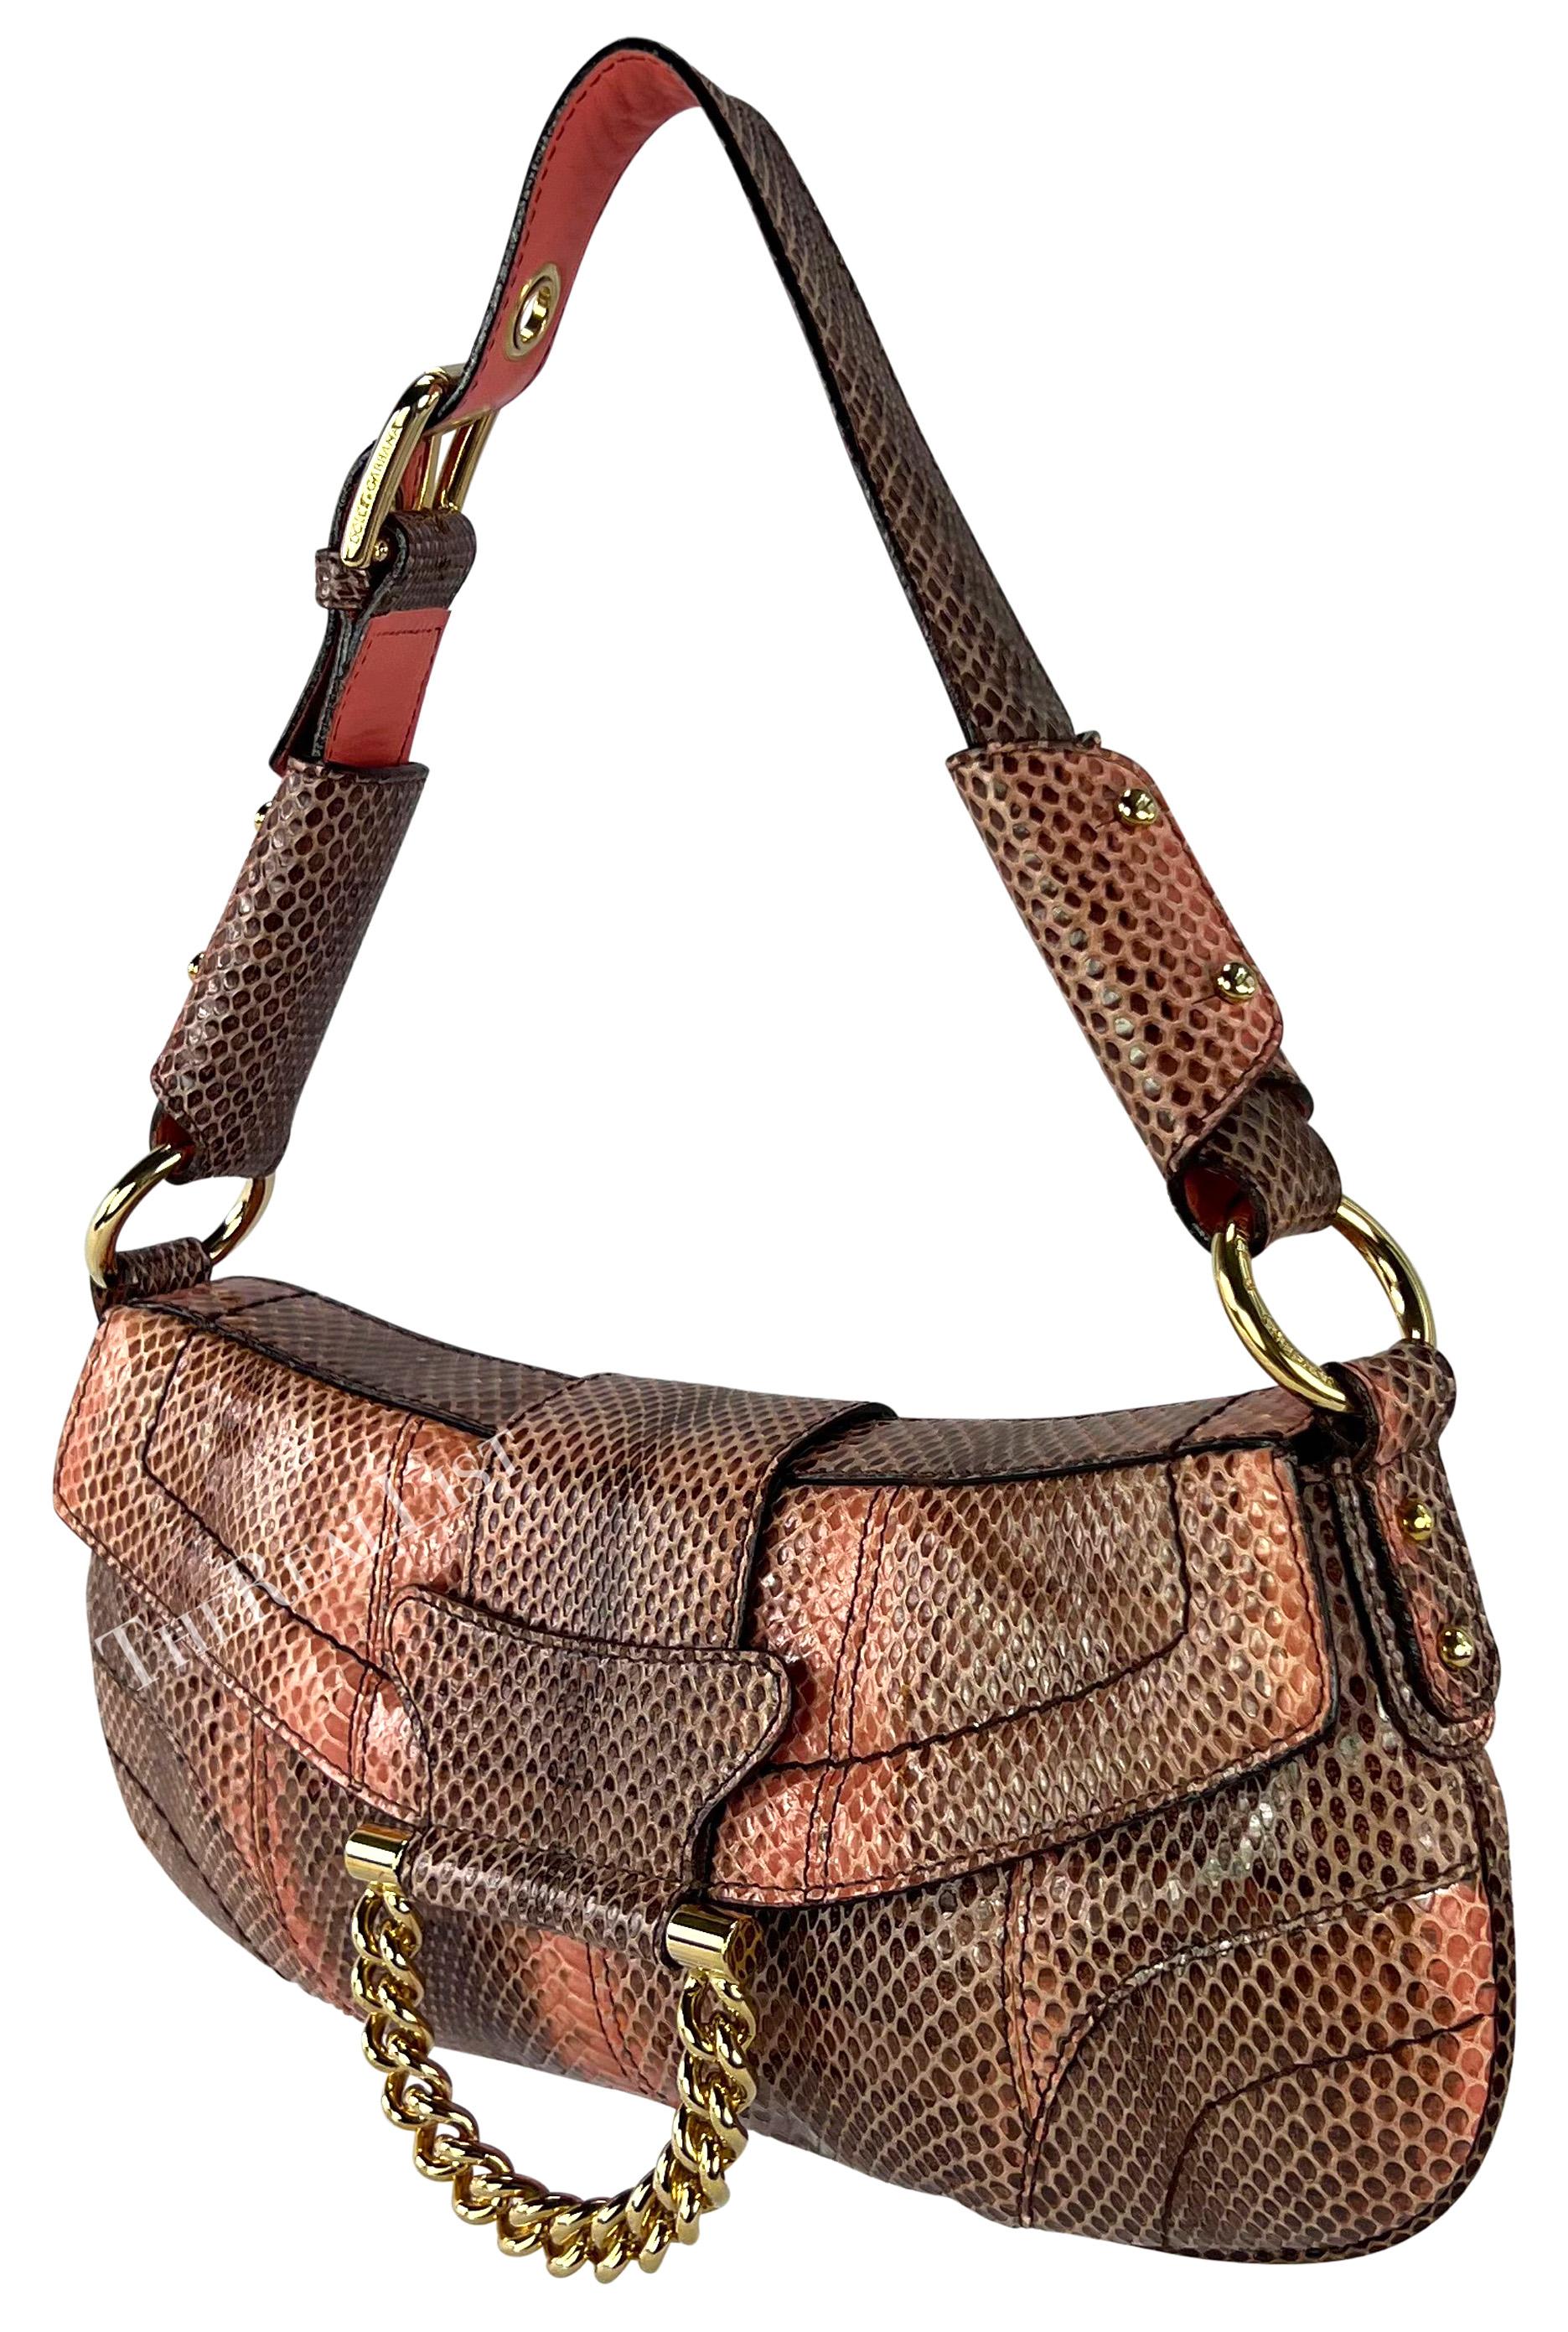 2004 Dolce & Gabbana Salmon Tone Snakeskin Chain Ring Small Shoulder Bag In Excellent Condition For Sale In West Hollywood, CA